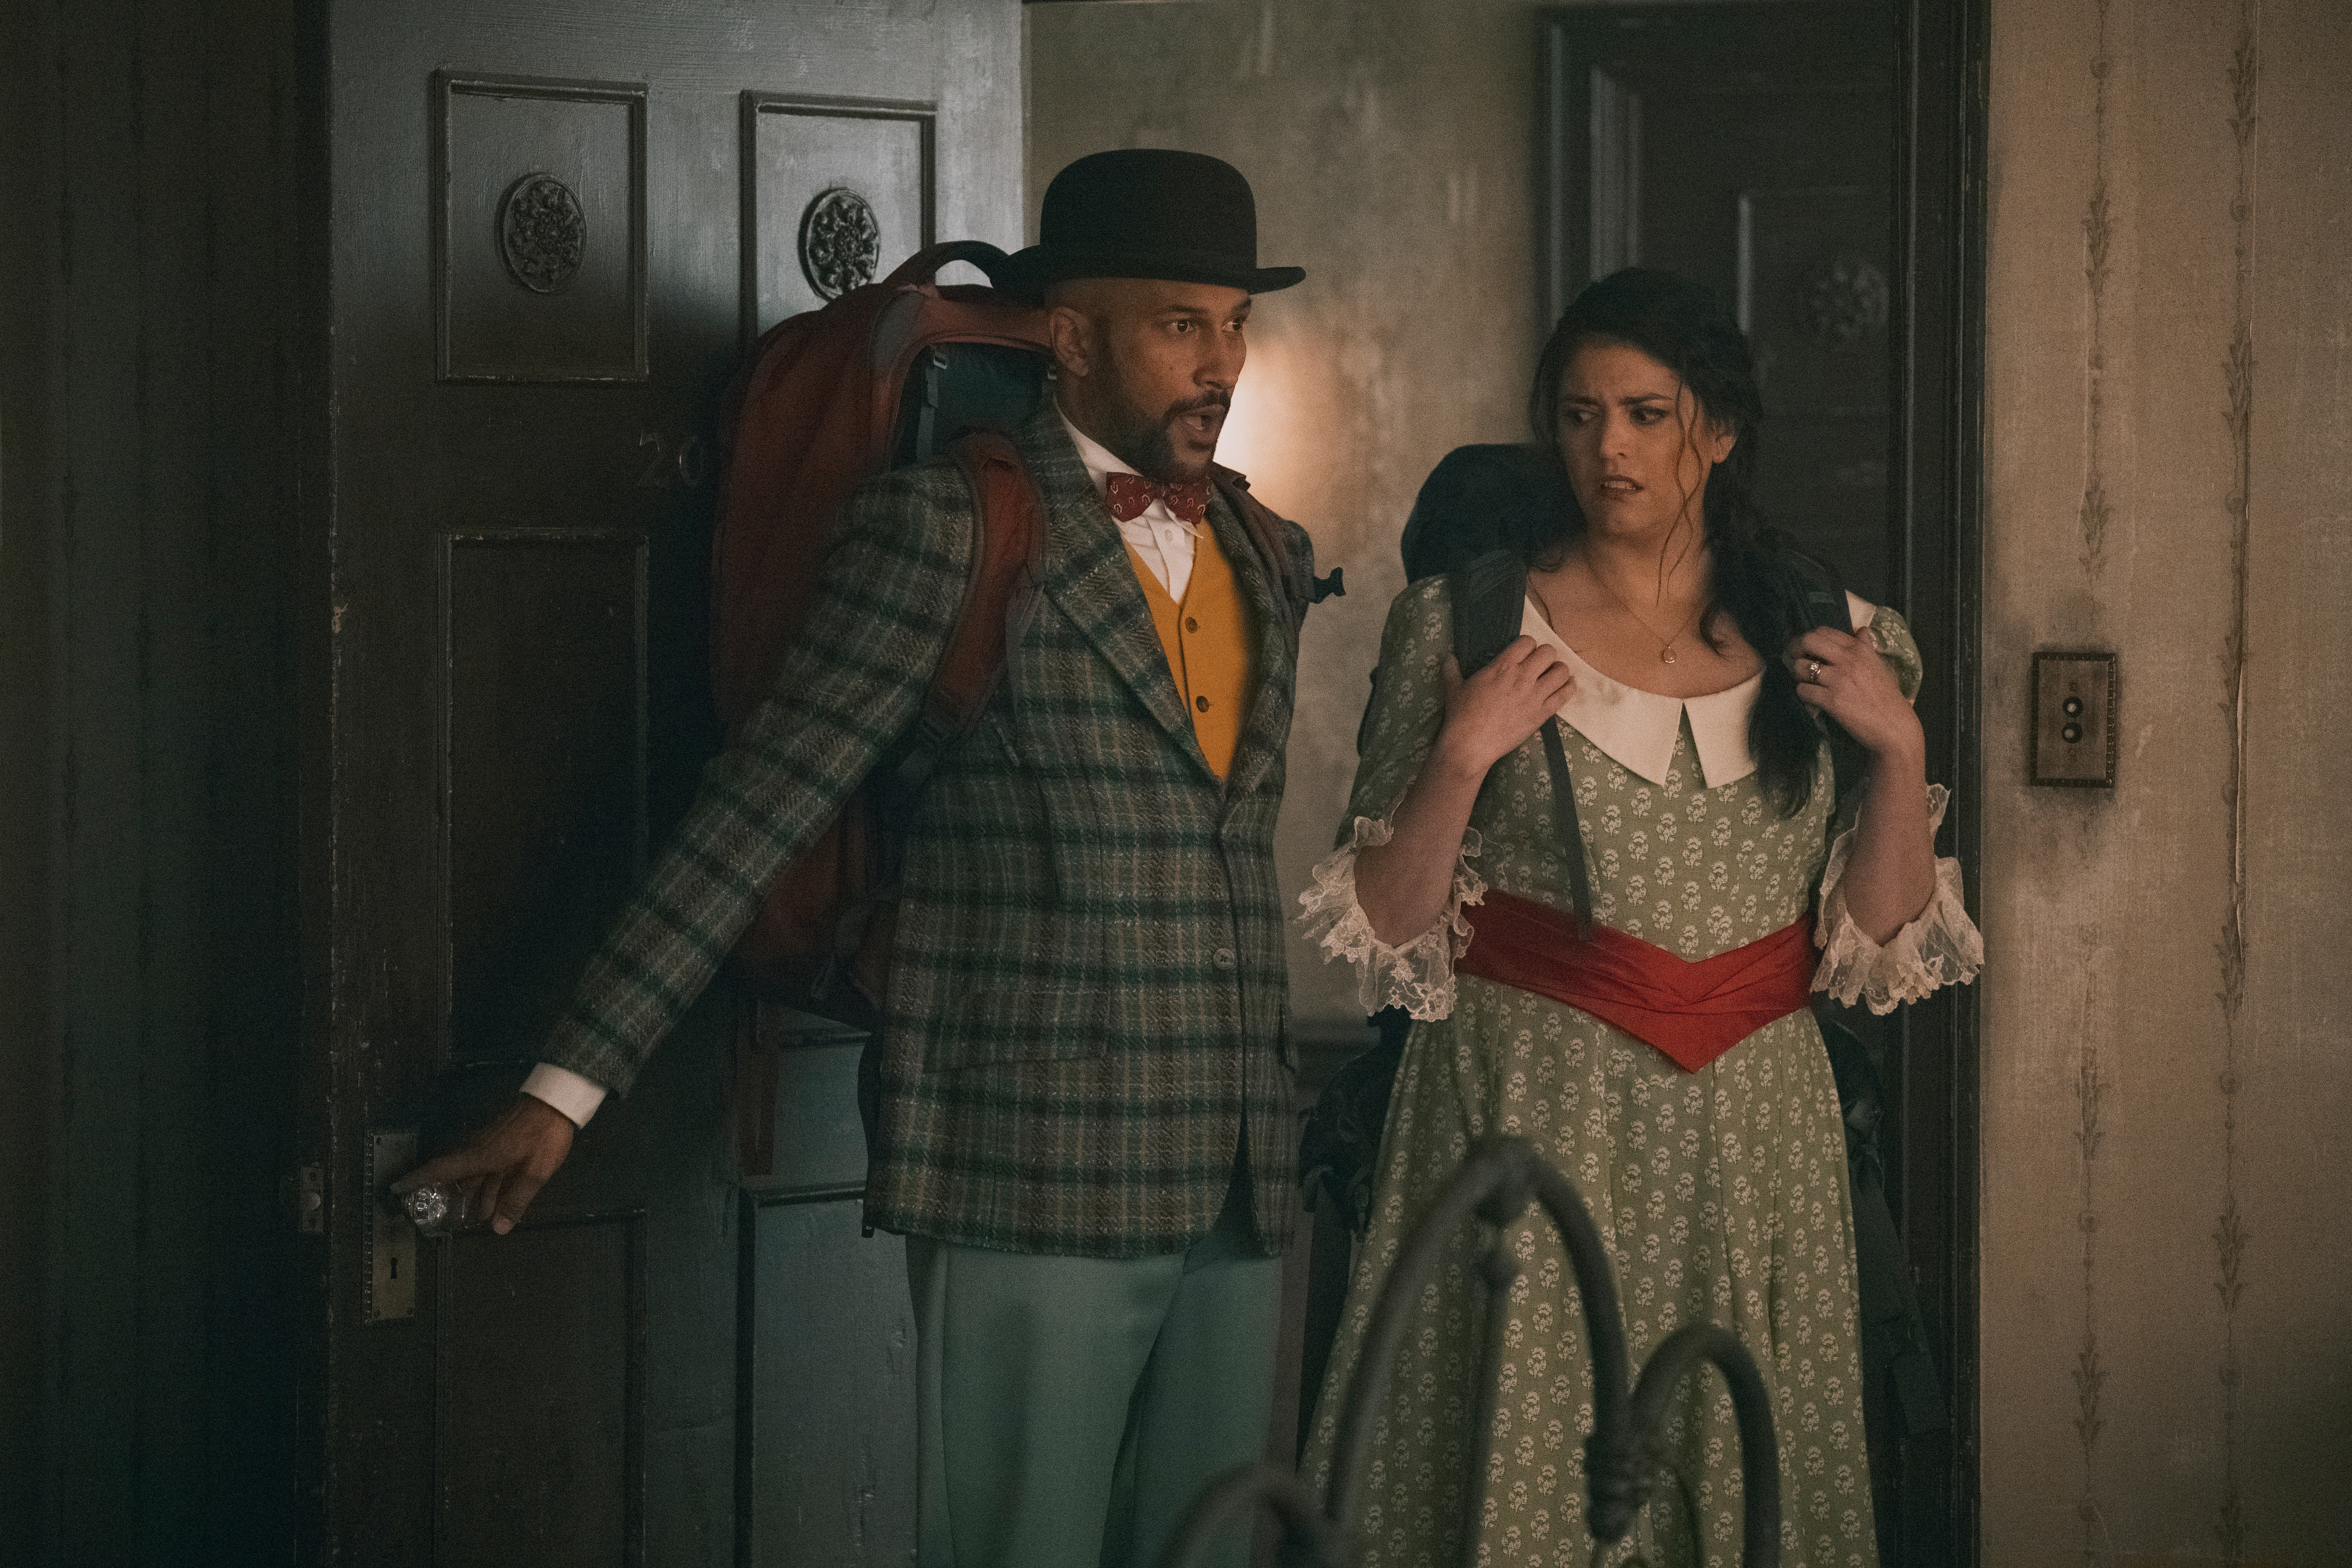 Episode 1. Keegan-Michael Key and Cecily Strong in "Schmigadoon!," premiering April 5, 2023 on Apple TV+.